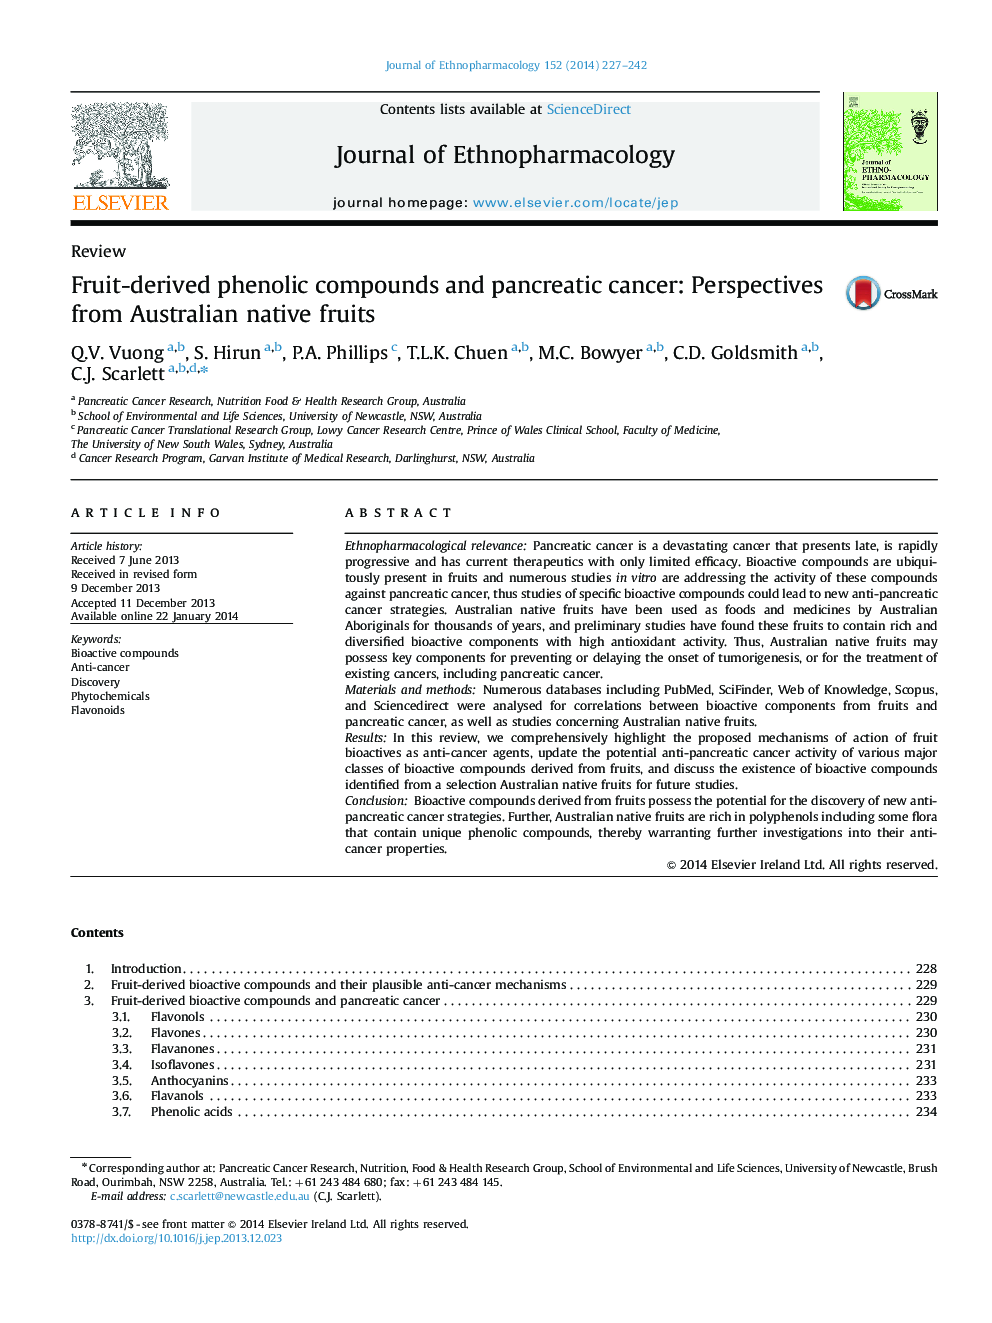 Fruit-derived phenolic compounds and pancreatic cancer: Perspectives from Australian native fruits